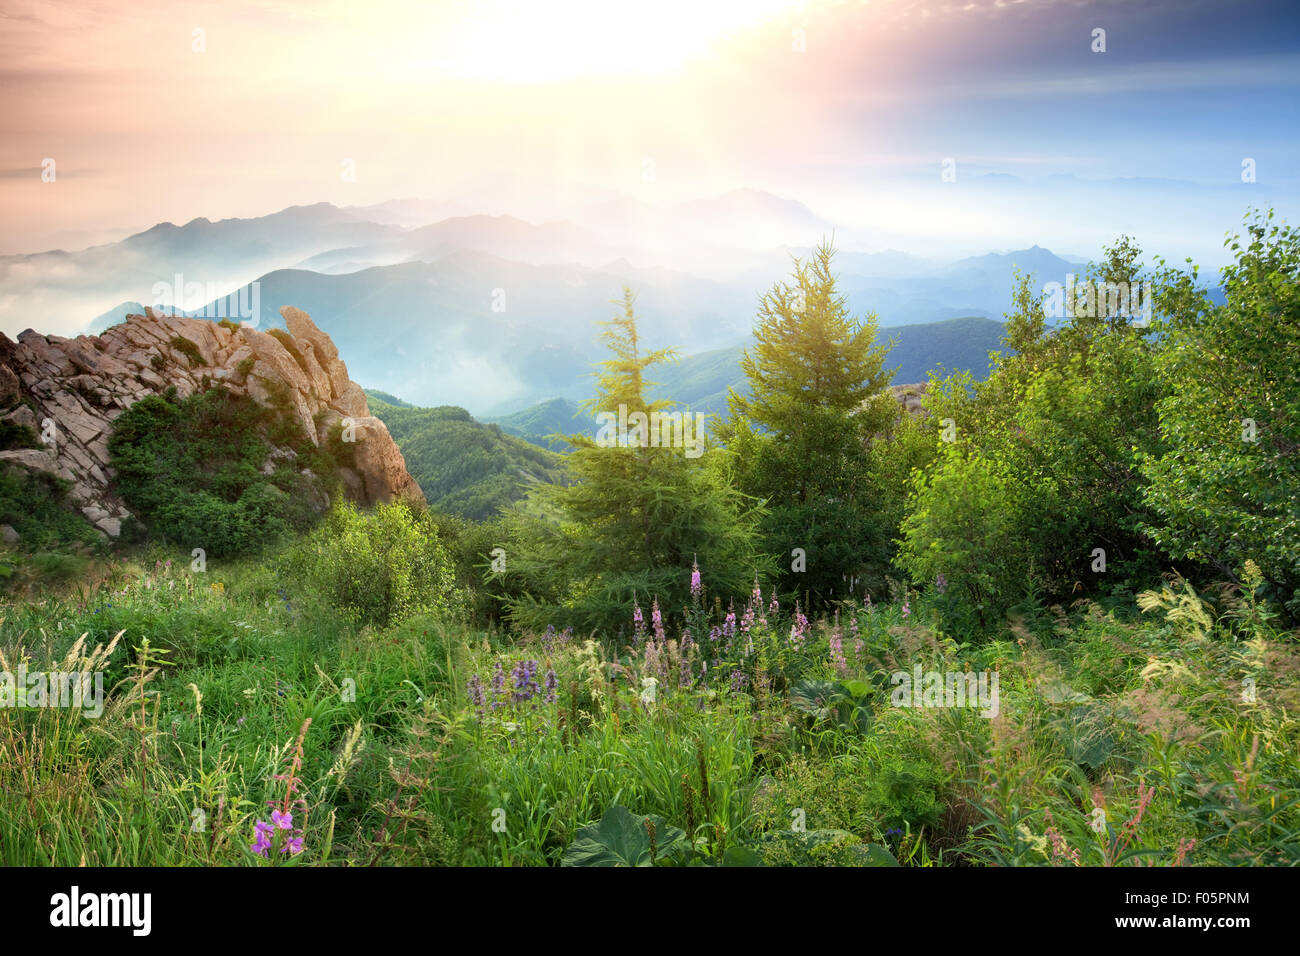 Summer landscape in mountains. Stock Photo